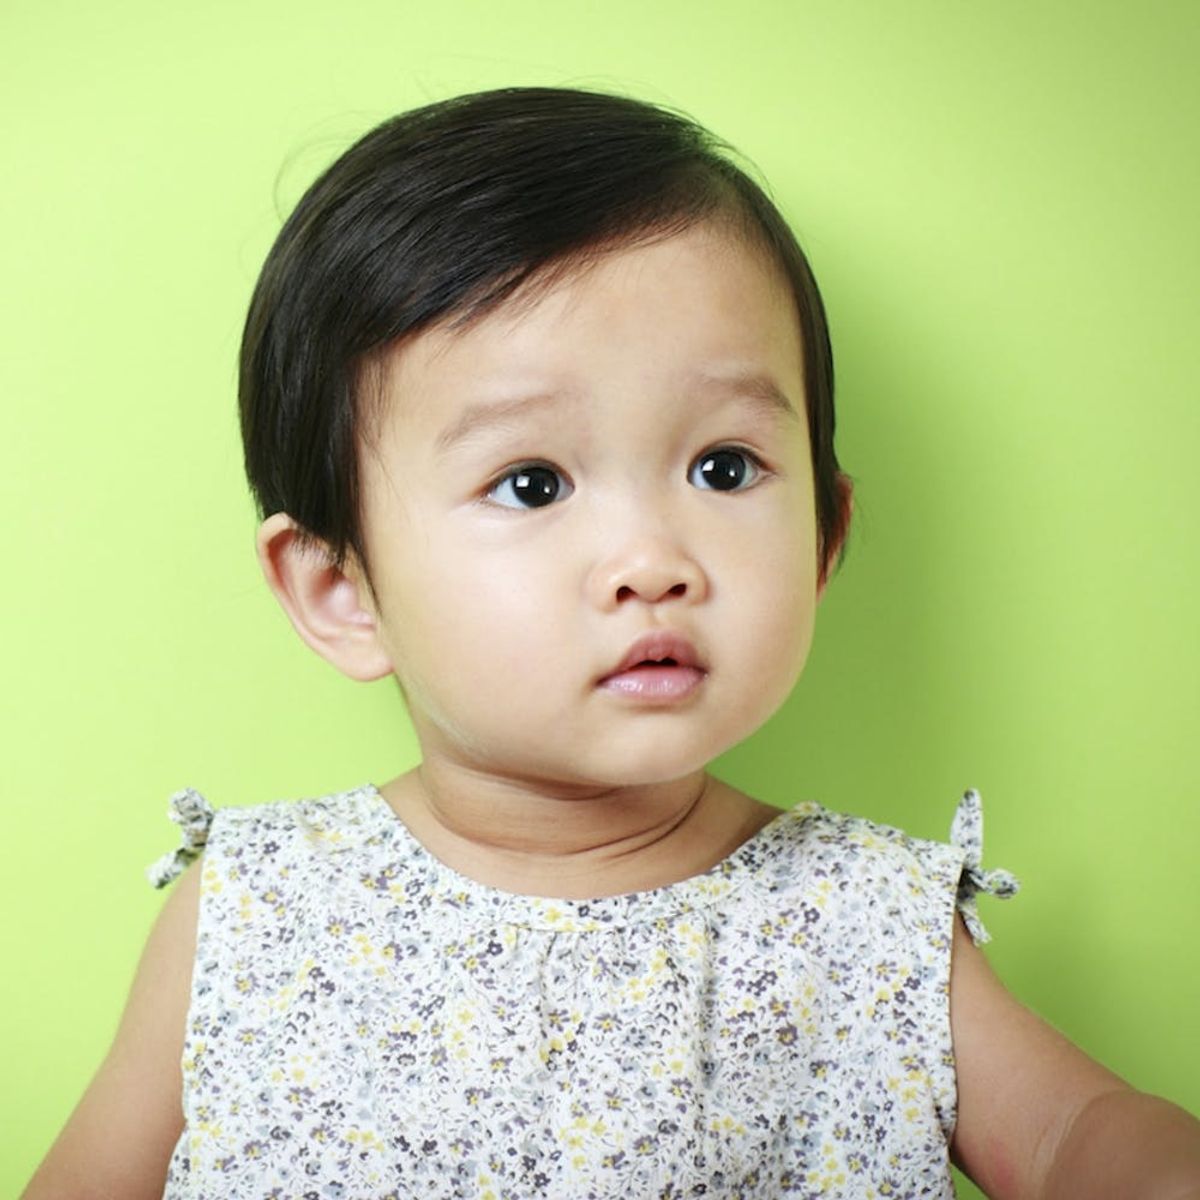 These Popular Baby Names Didn’t Exist Before the Year 2000